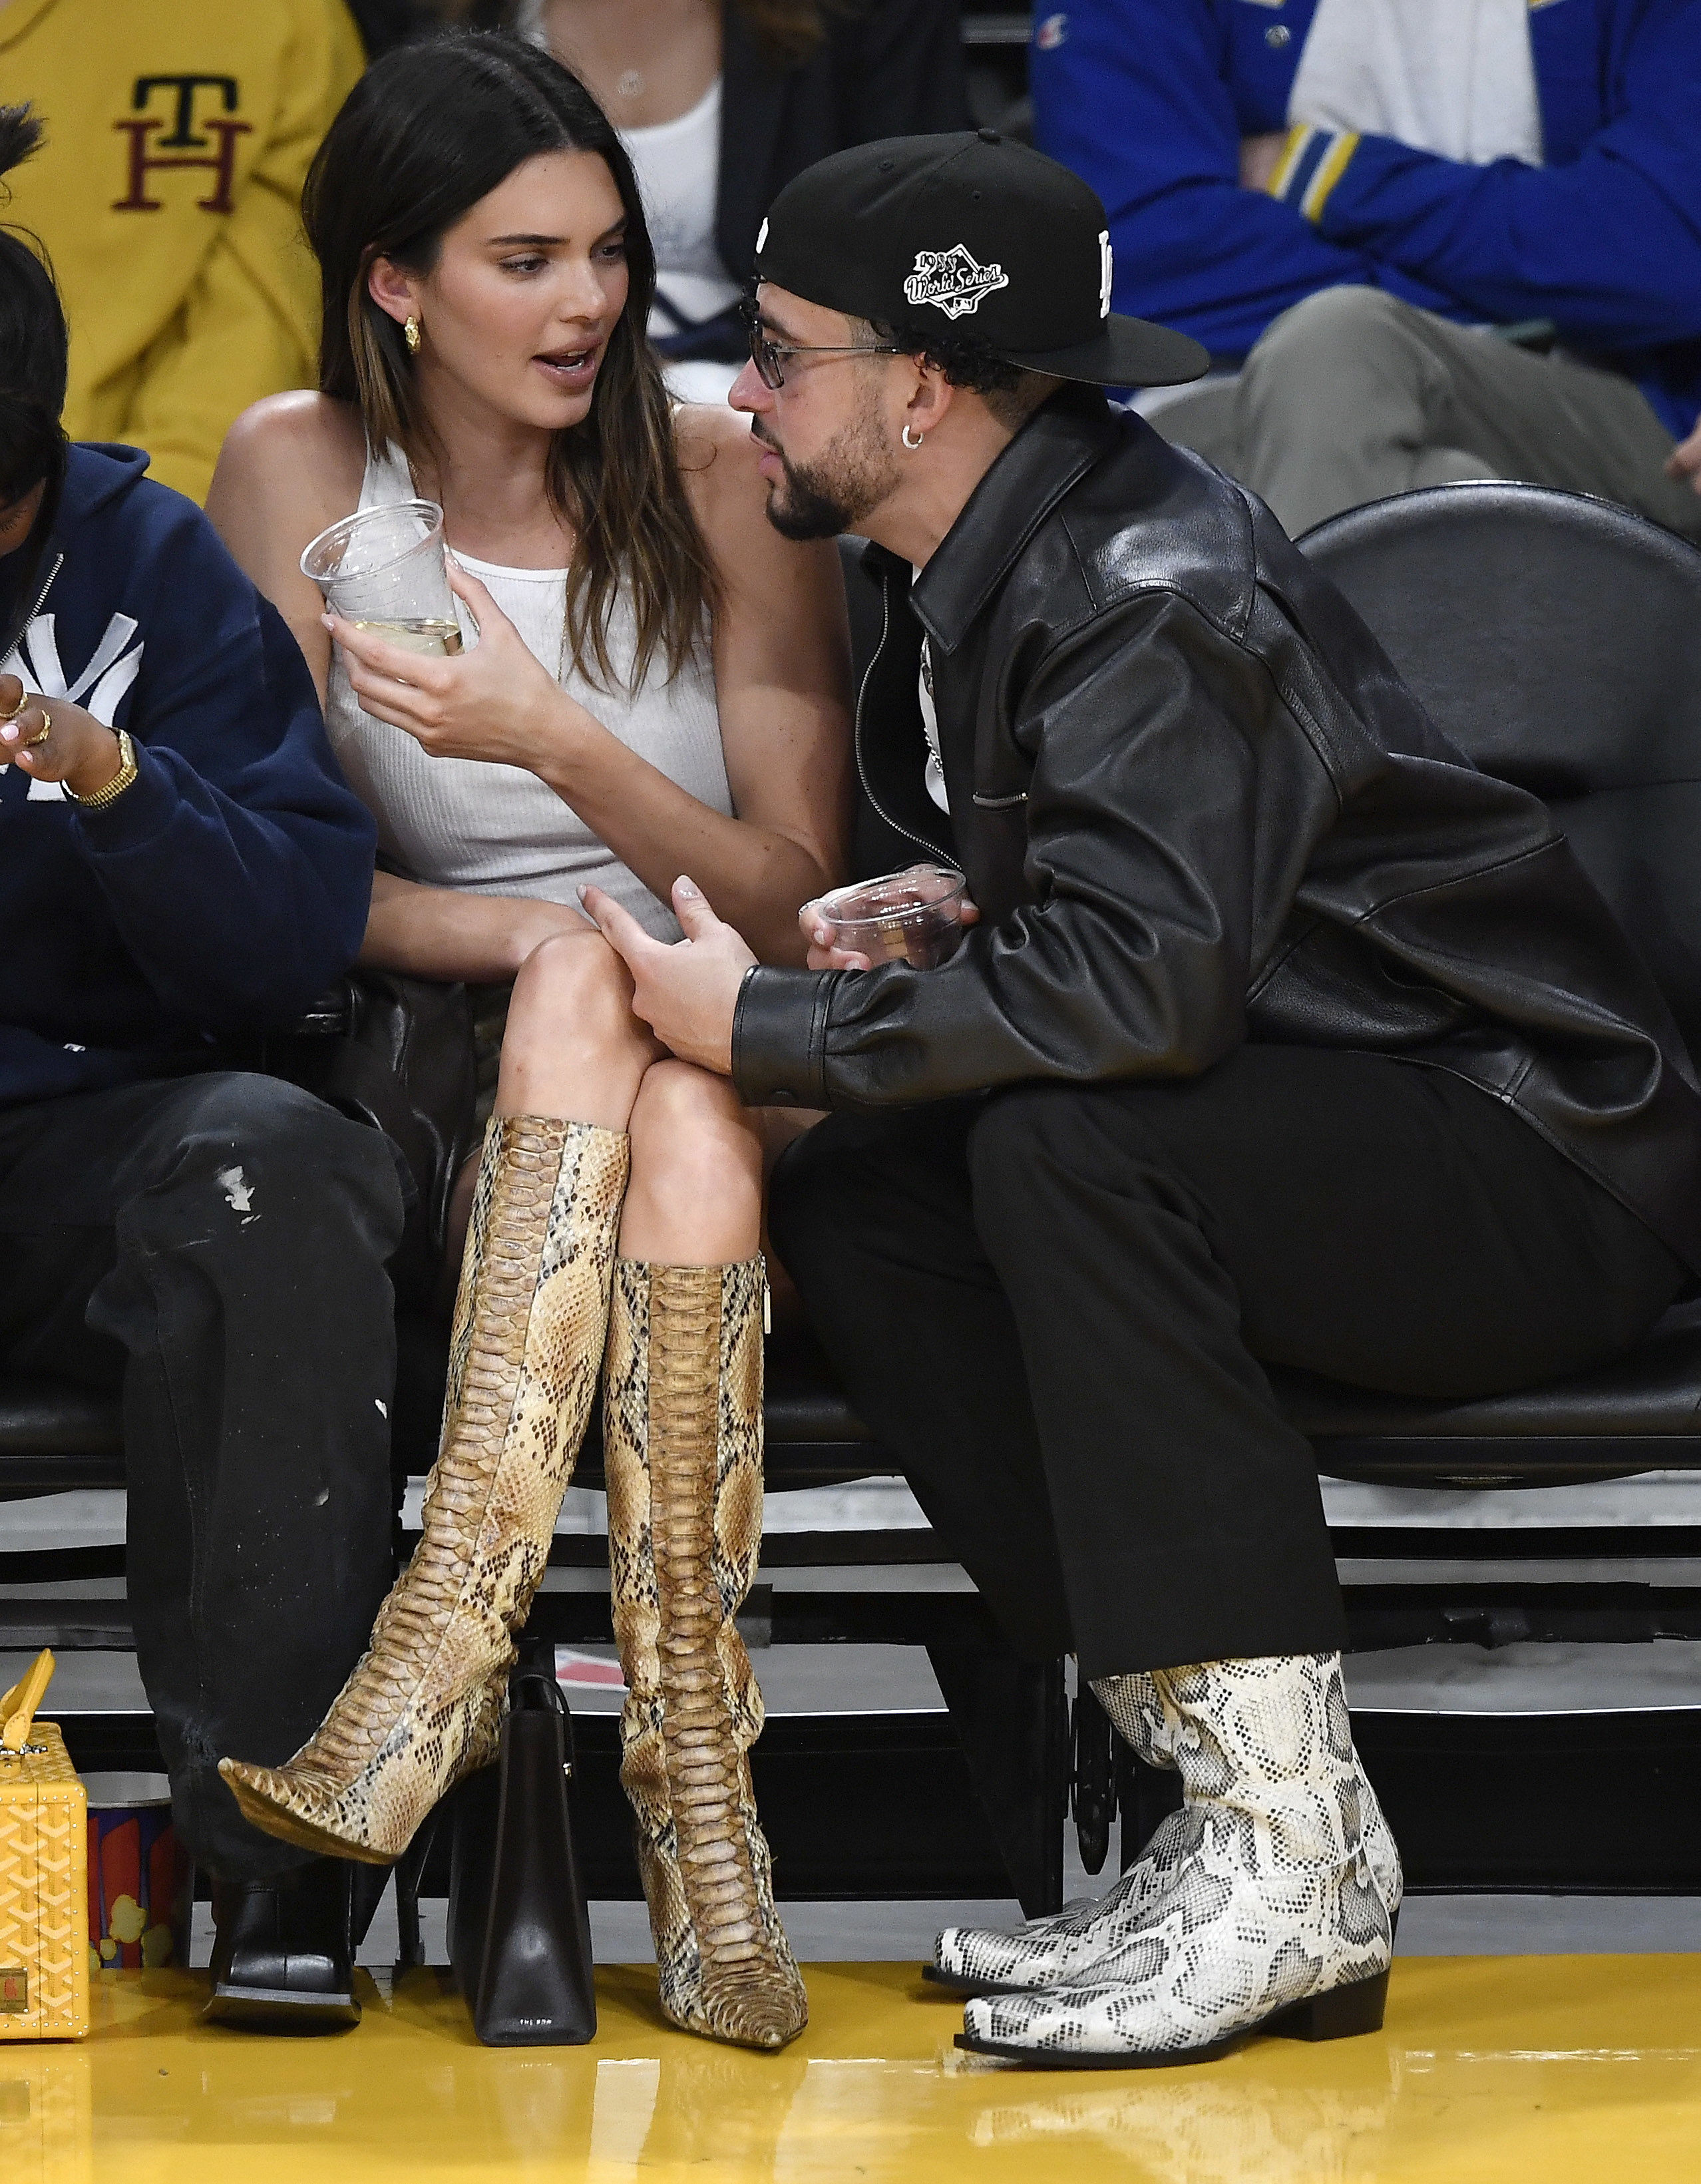 Close-up of Kendall and Bad Bunny sitting together in a sports arena